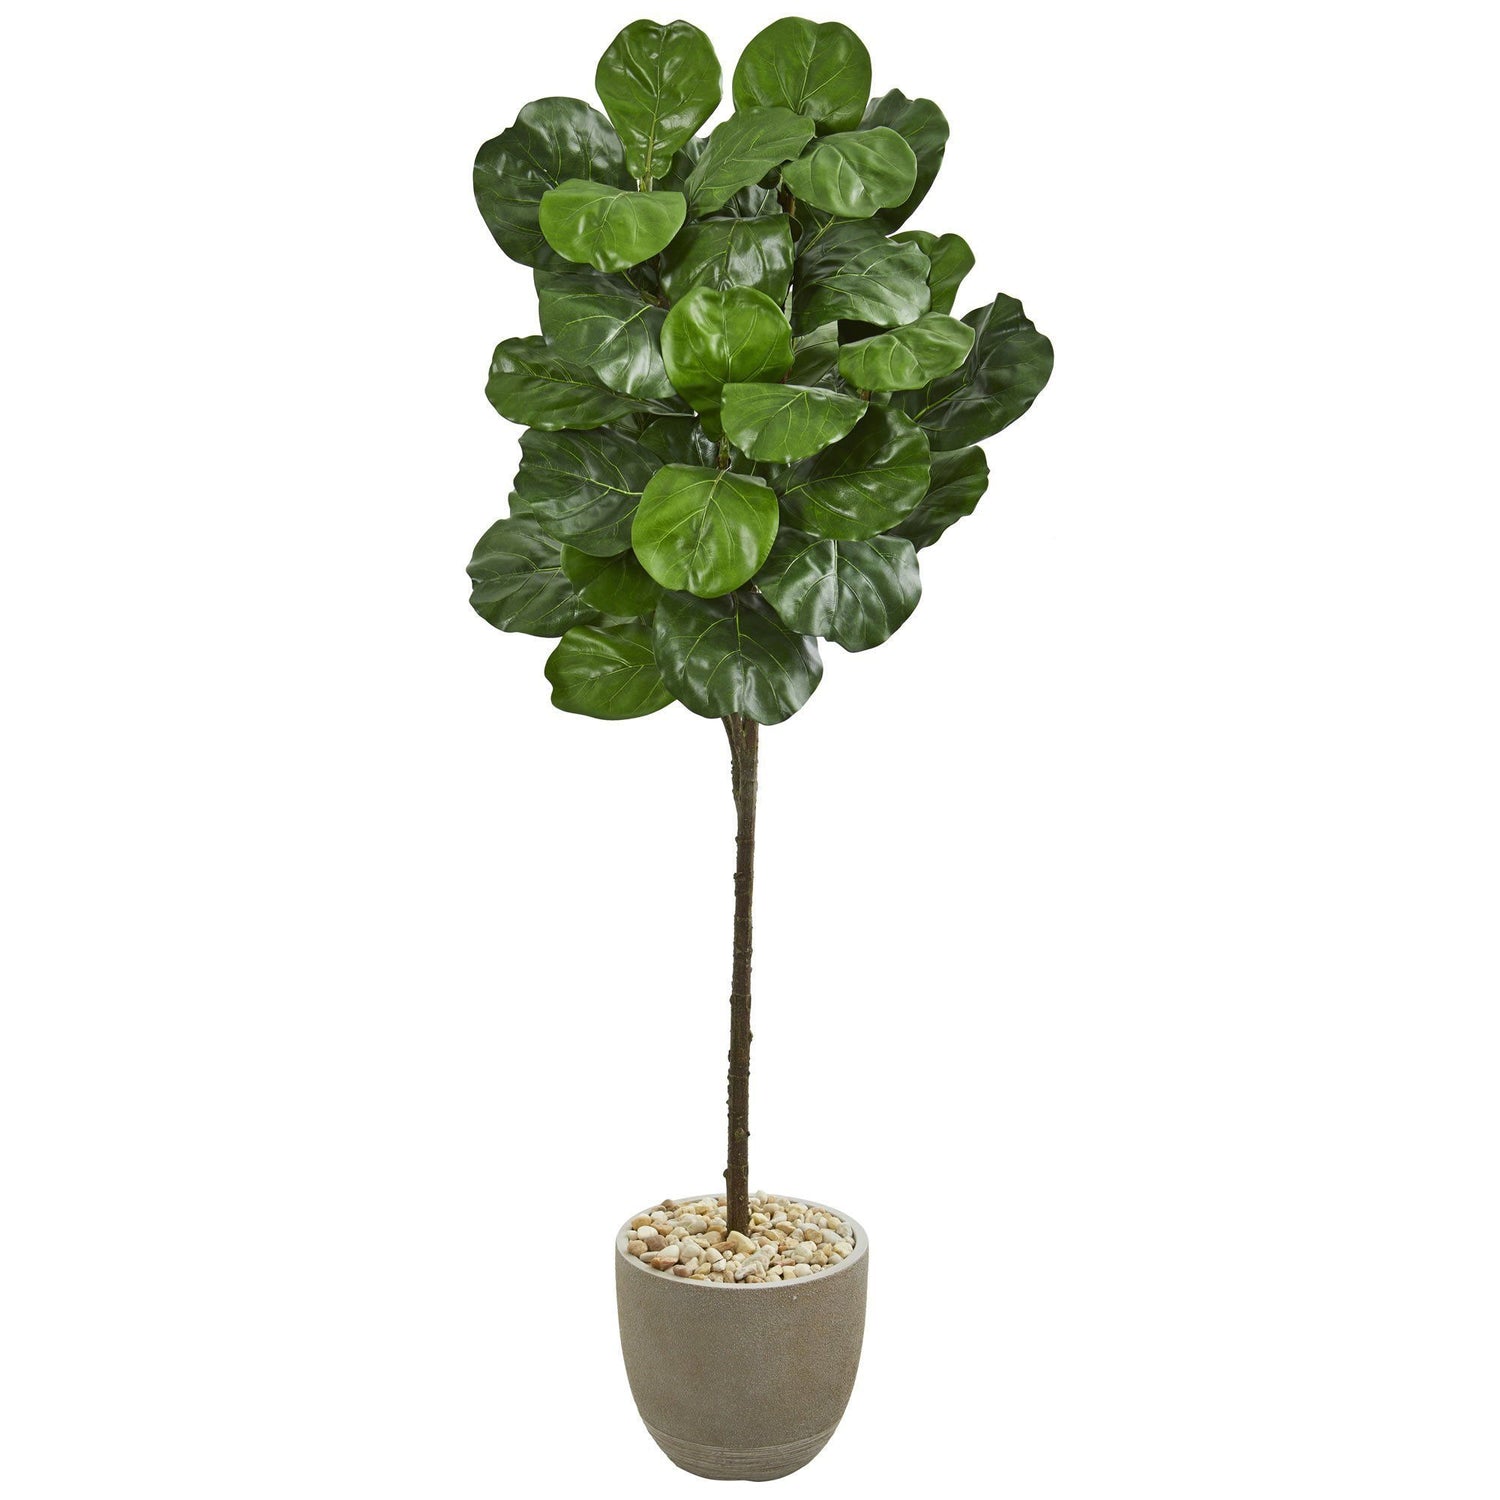 5.5’ Fiddle Leaf Artificial Tree in Sand Stone Finish Planter